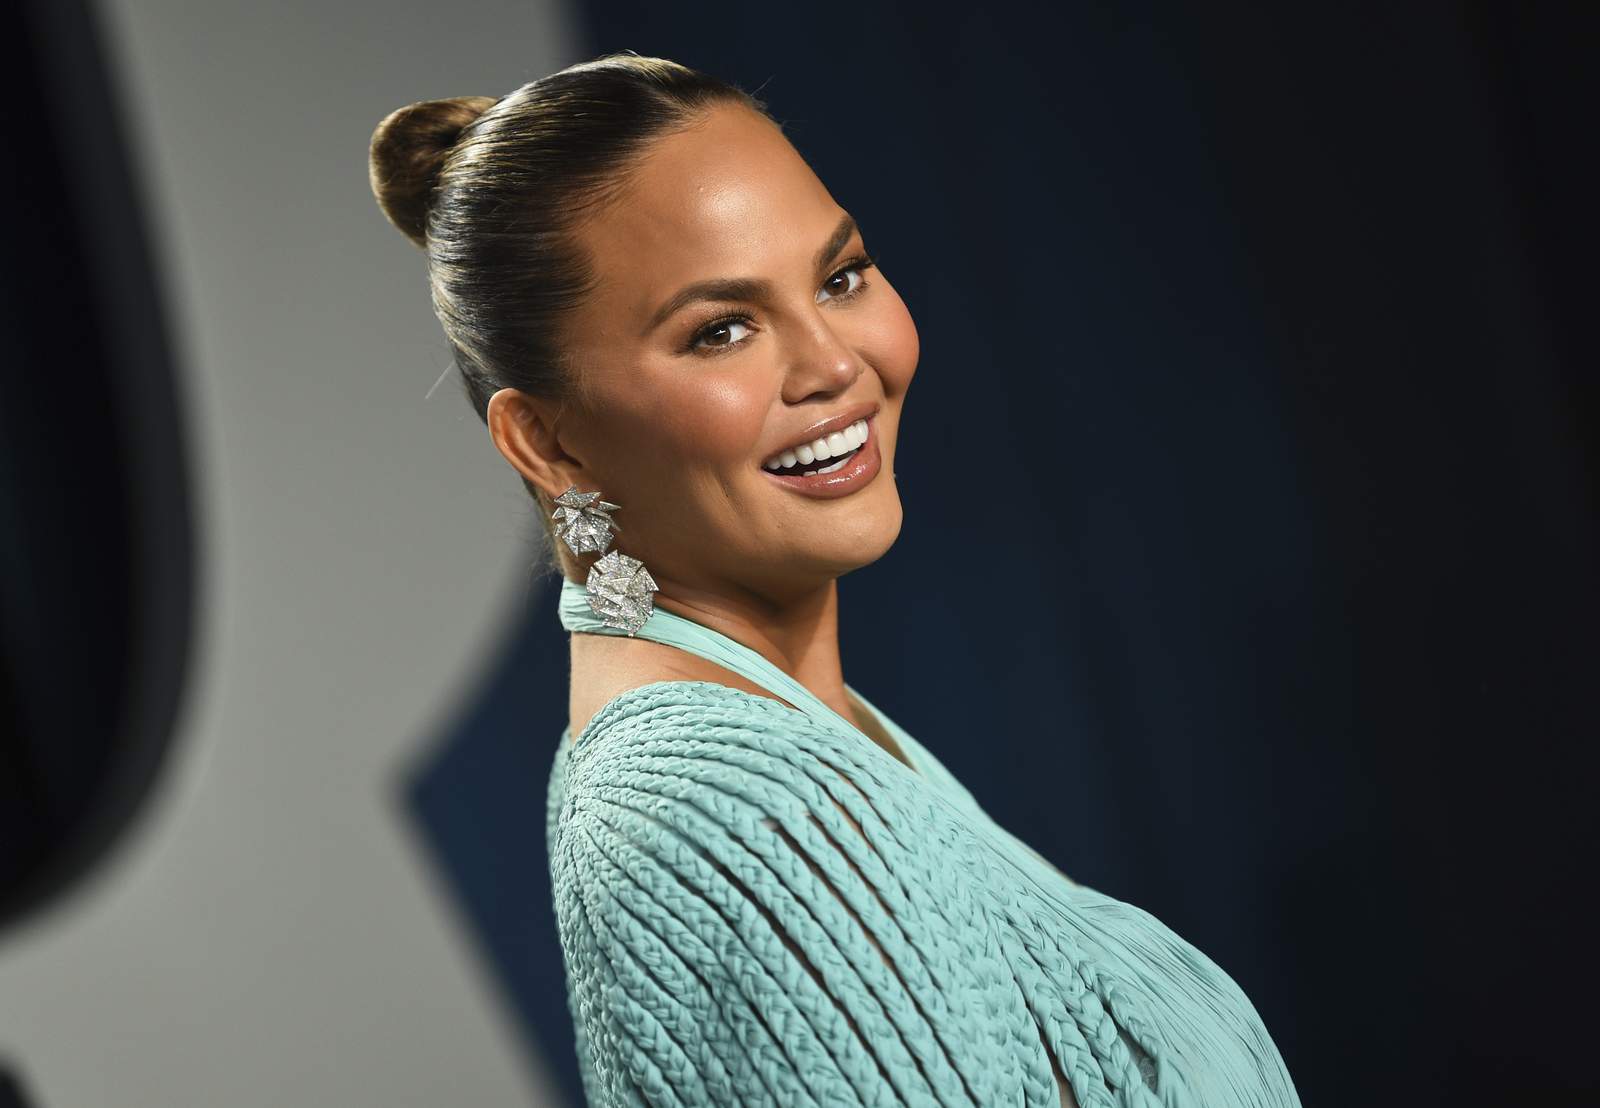 Chrissy Teigen graces cover of People’s ‘Beautiful Issue’